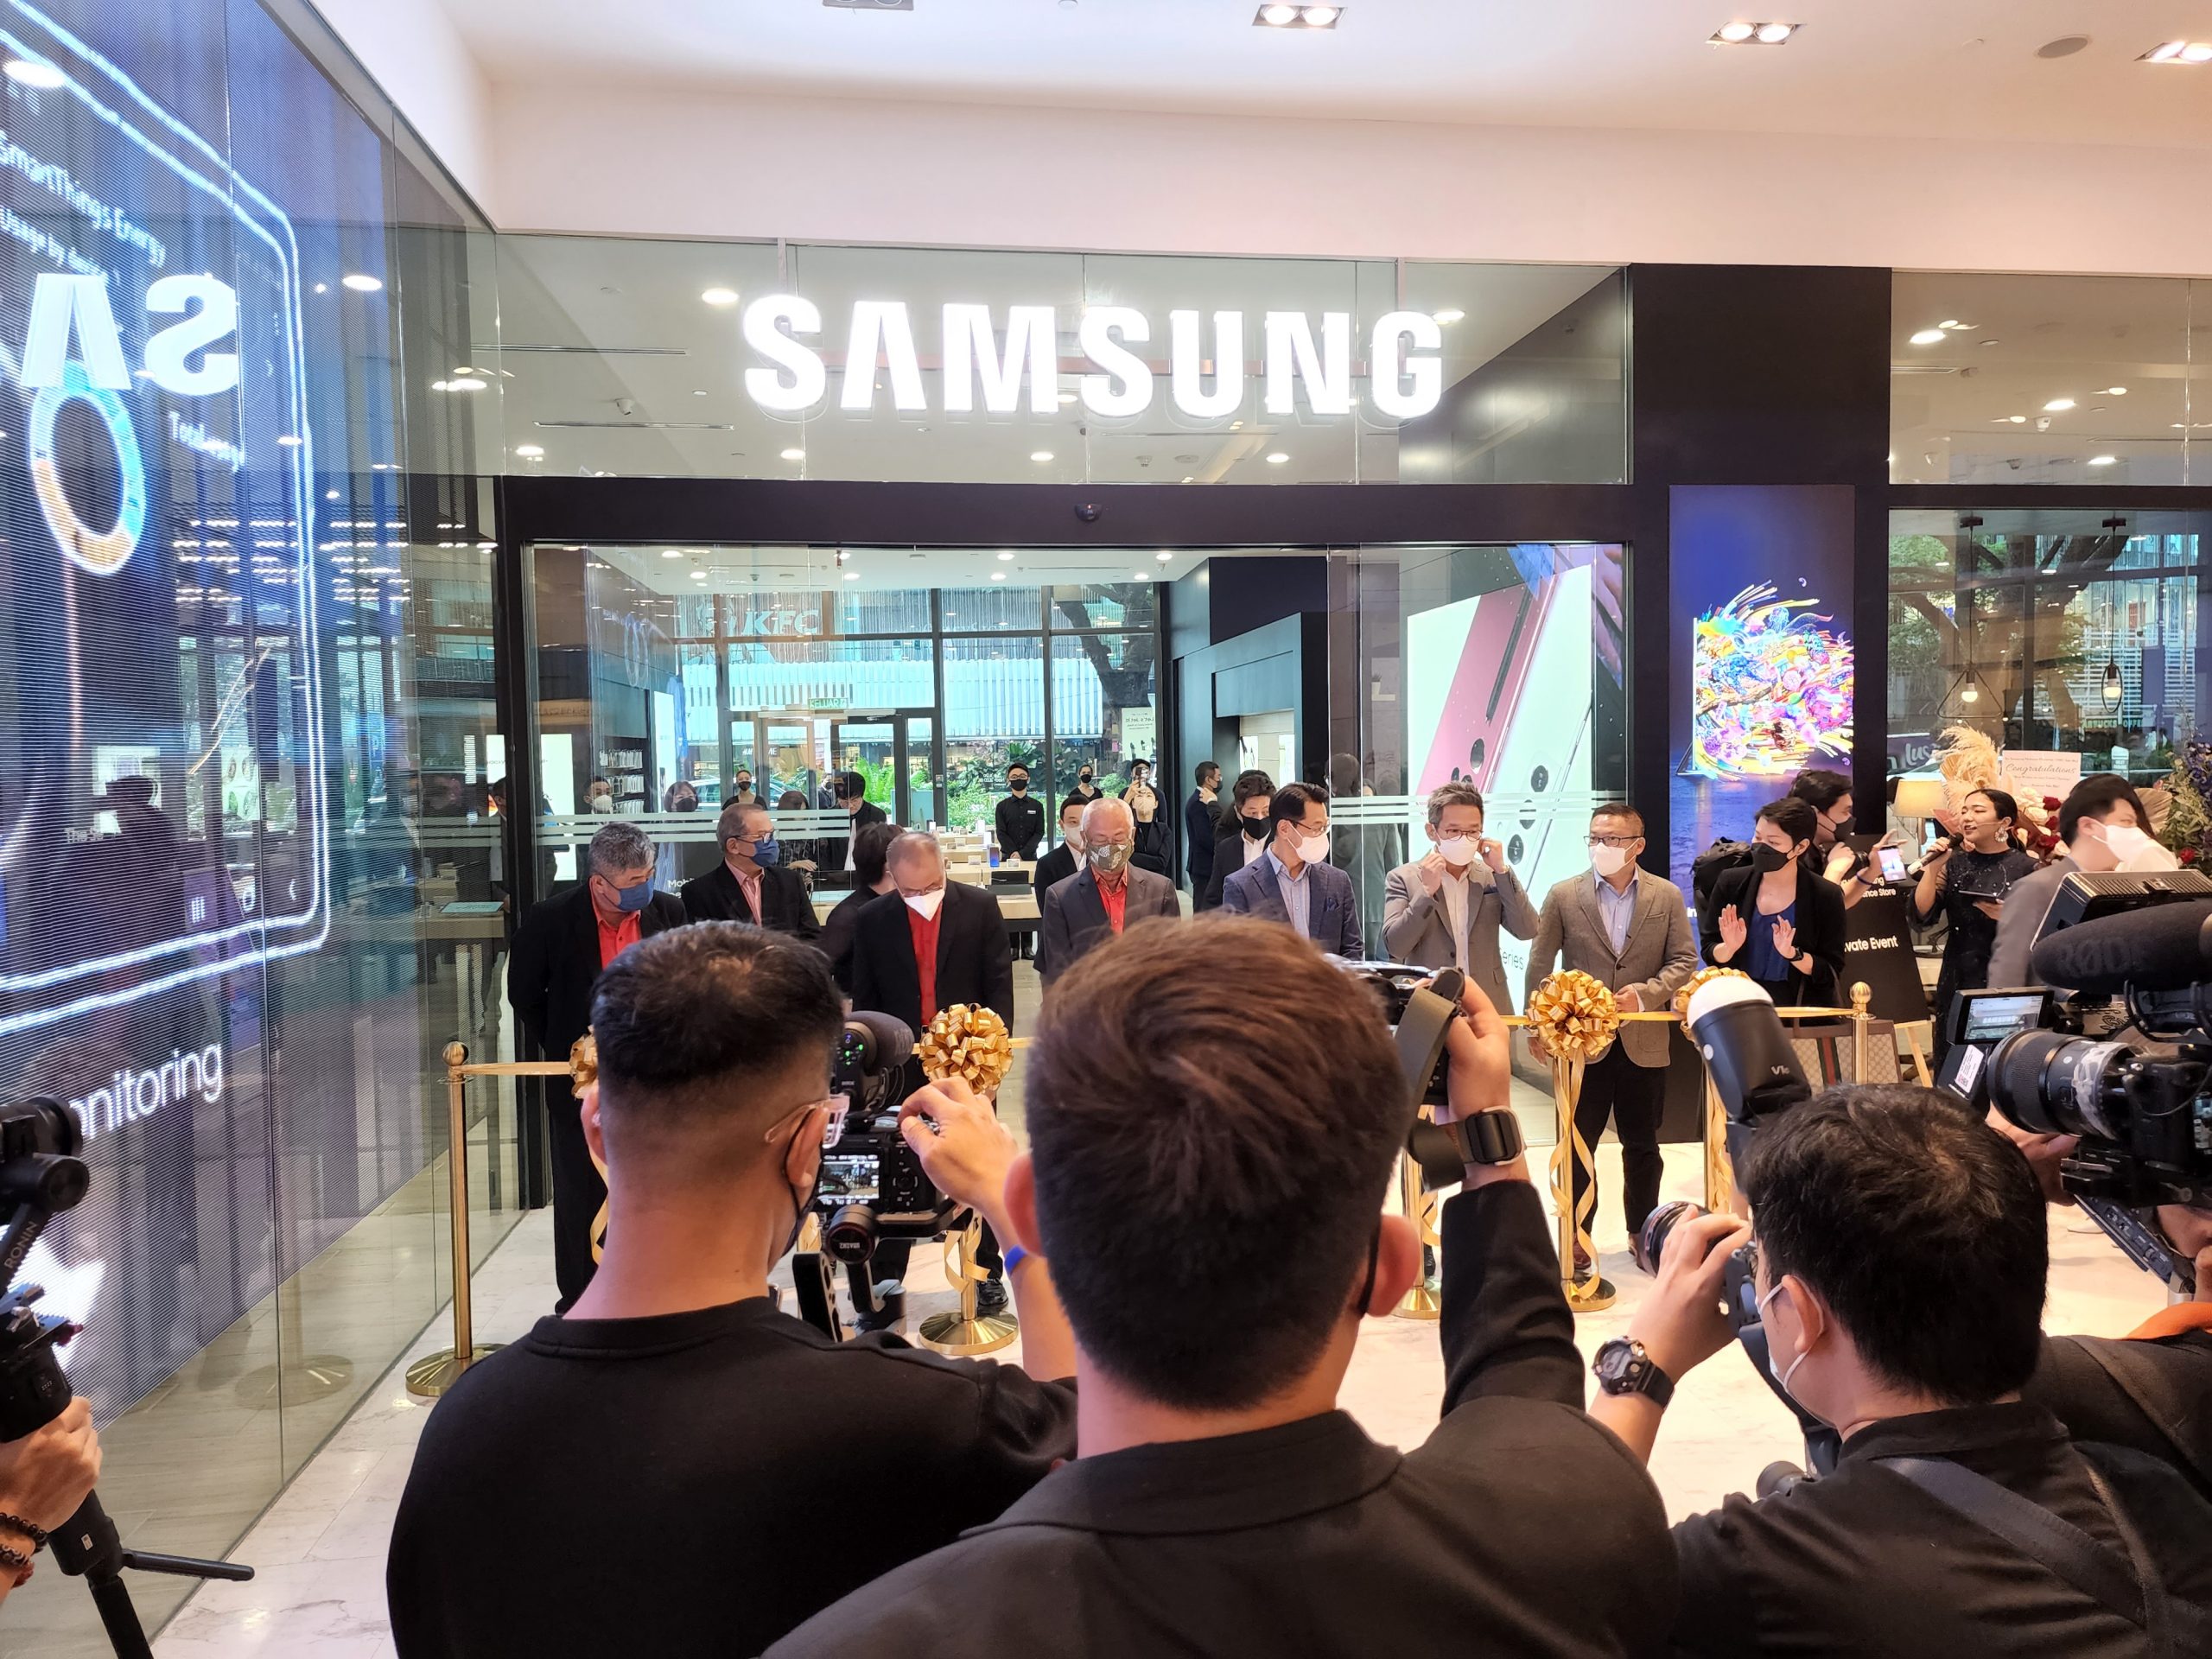 Senheng Together With Samsung, Launch Samsung’s First-Ever Premium Experience Store in Southeast Asia!